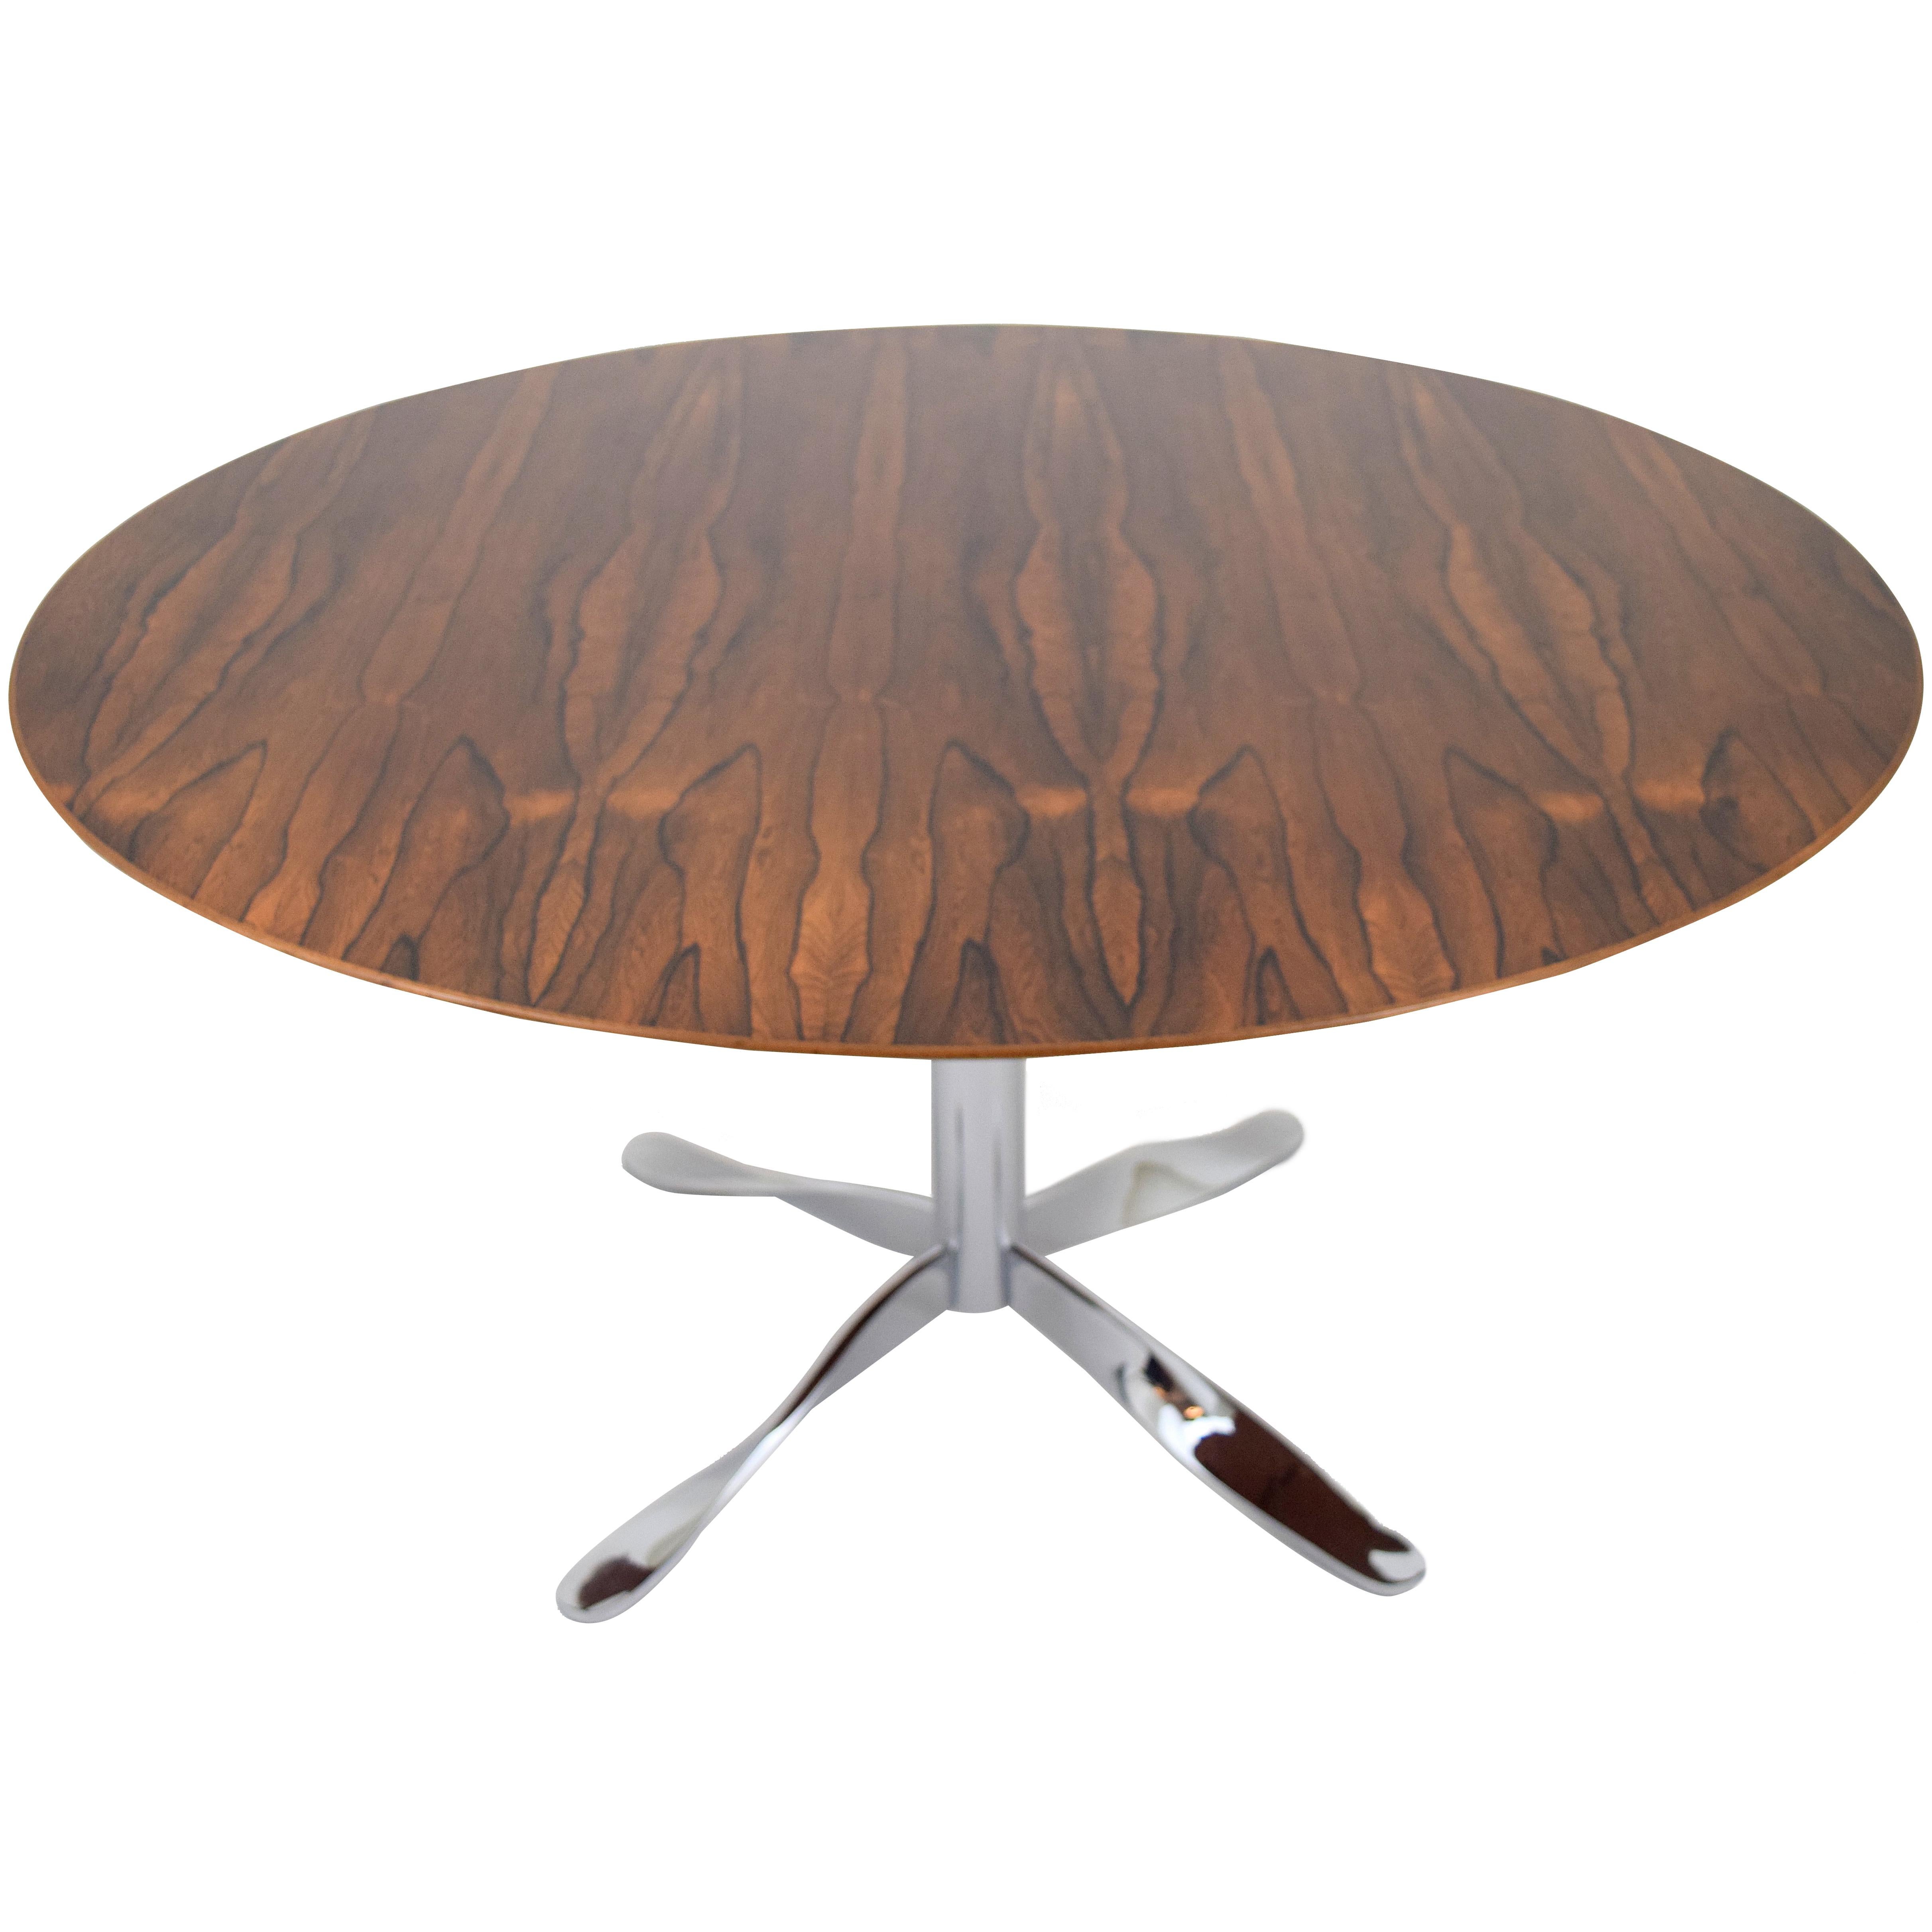 Rosewood and "Twisted" Chrome Base Dining Table